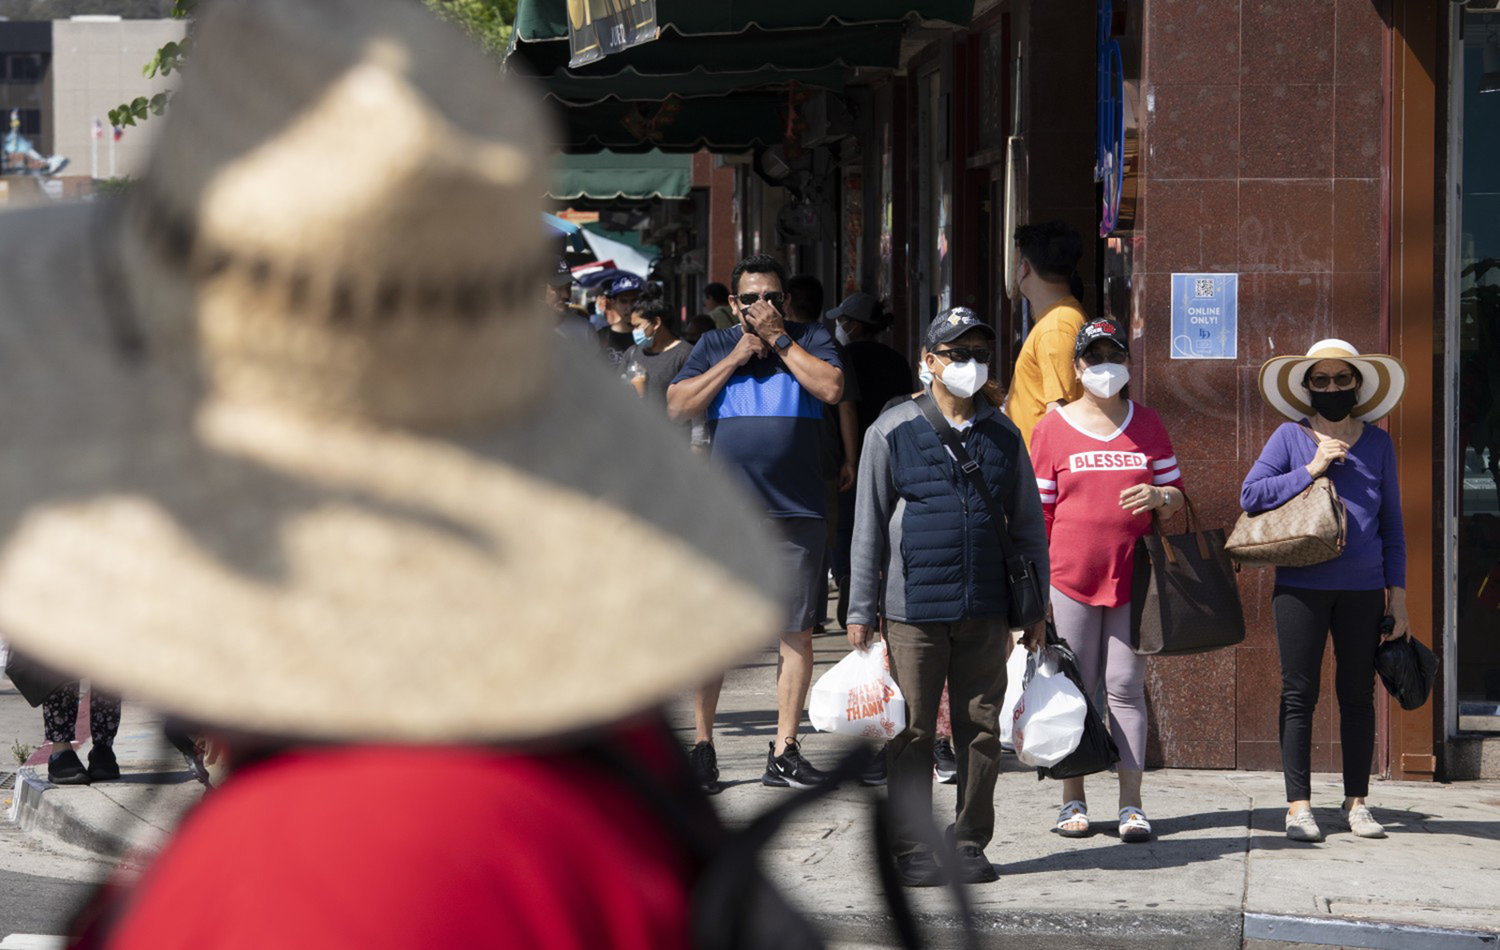 California's strict mask mandate has helped prevent the spread of COVID-19. But now, as the weather gets cooler and people go inside more, the disease could spread. Here, visitors to Chinatown wear masks in July 2021 in Los Angeles (Myung J. Chun/Los Angeles Times/TNS)